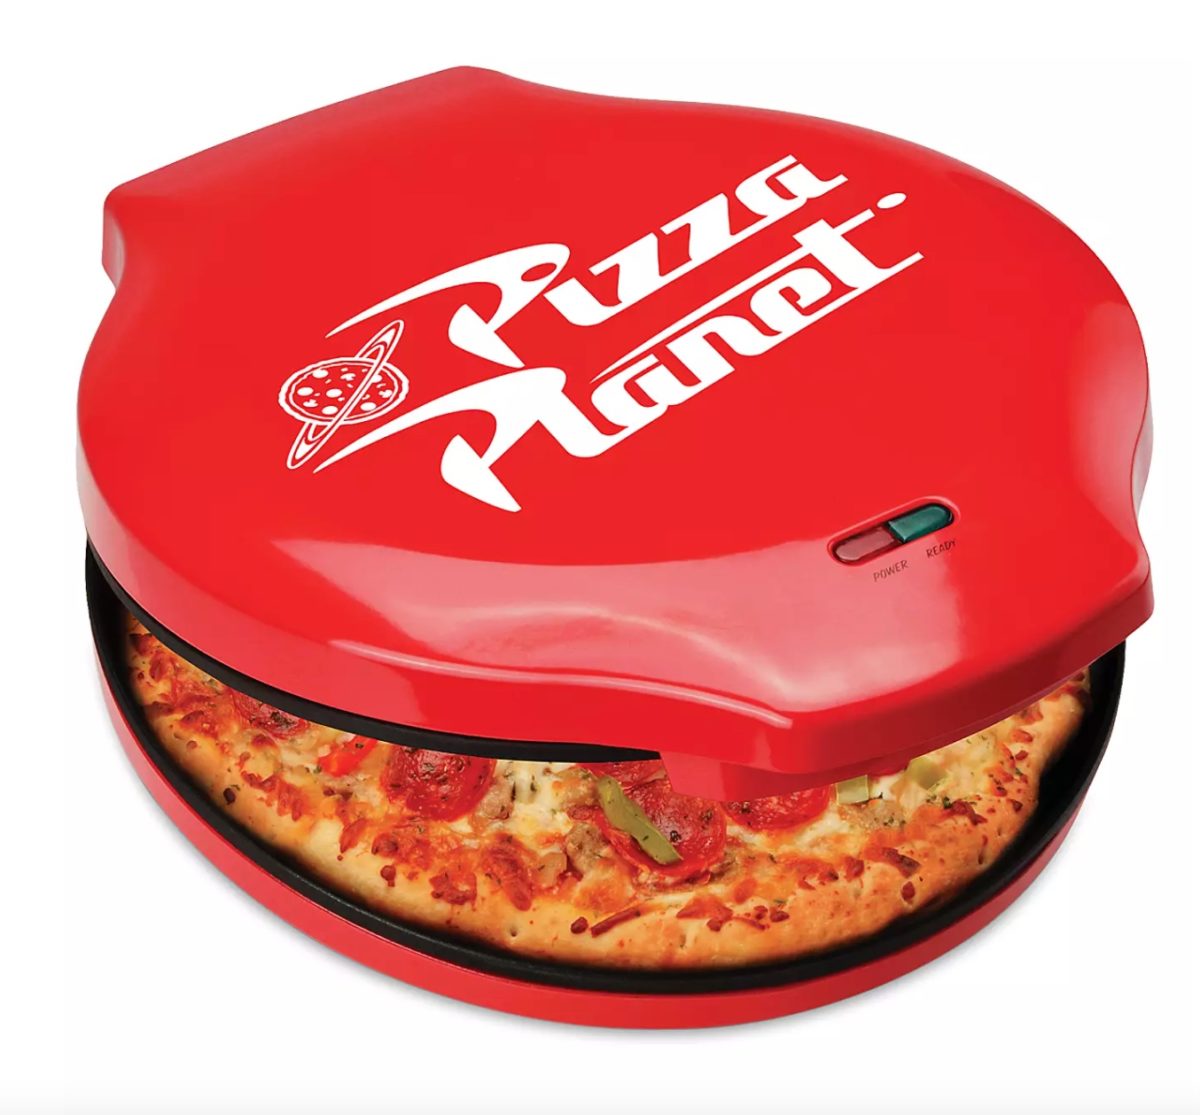 fun gift alert! you can now buy the toy story pizza planet pizza maker for your very own home